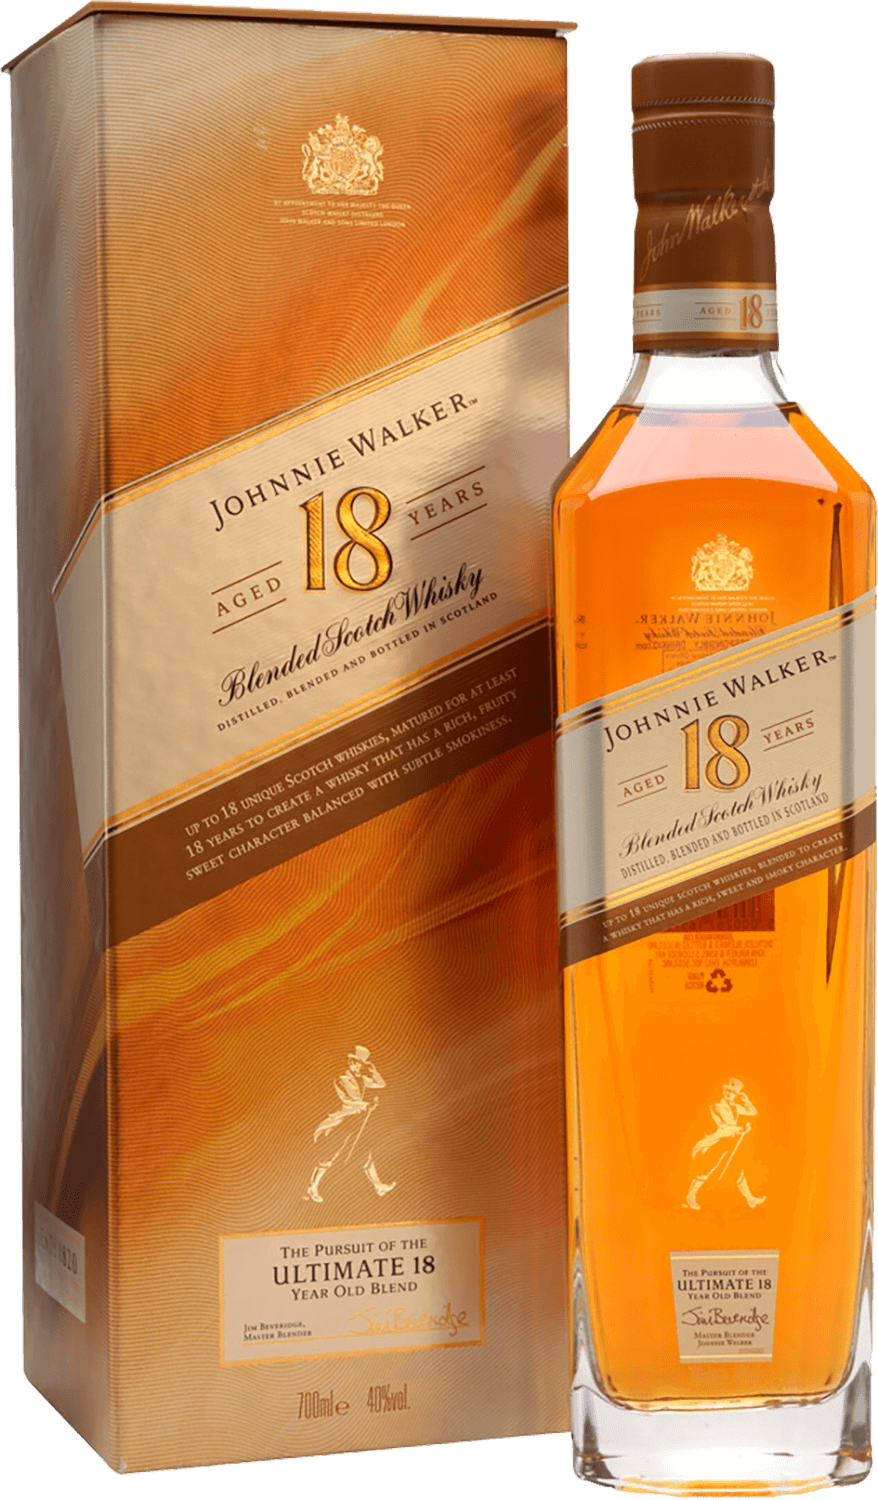 Johnnie Walker 18 y.o. Blended Scotch Whisky (gift box) johnnie walker gold label blended scotch whisky gift box